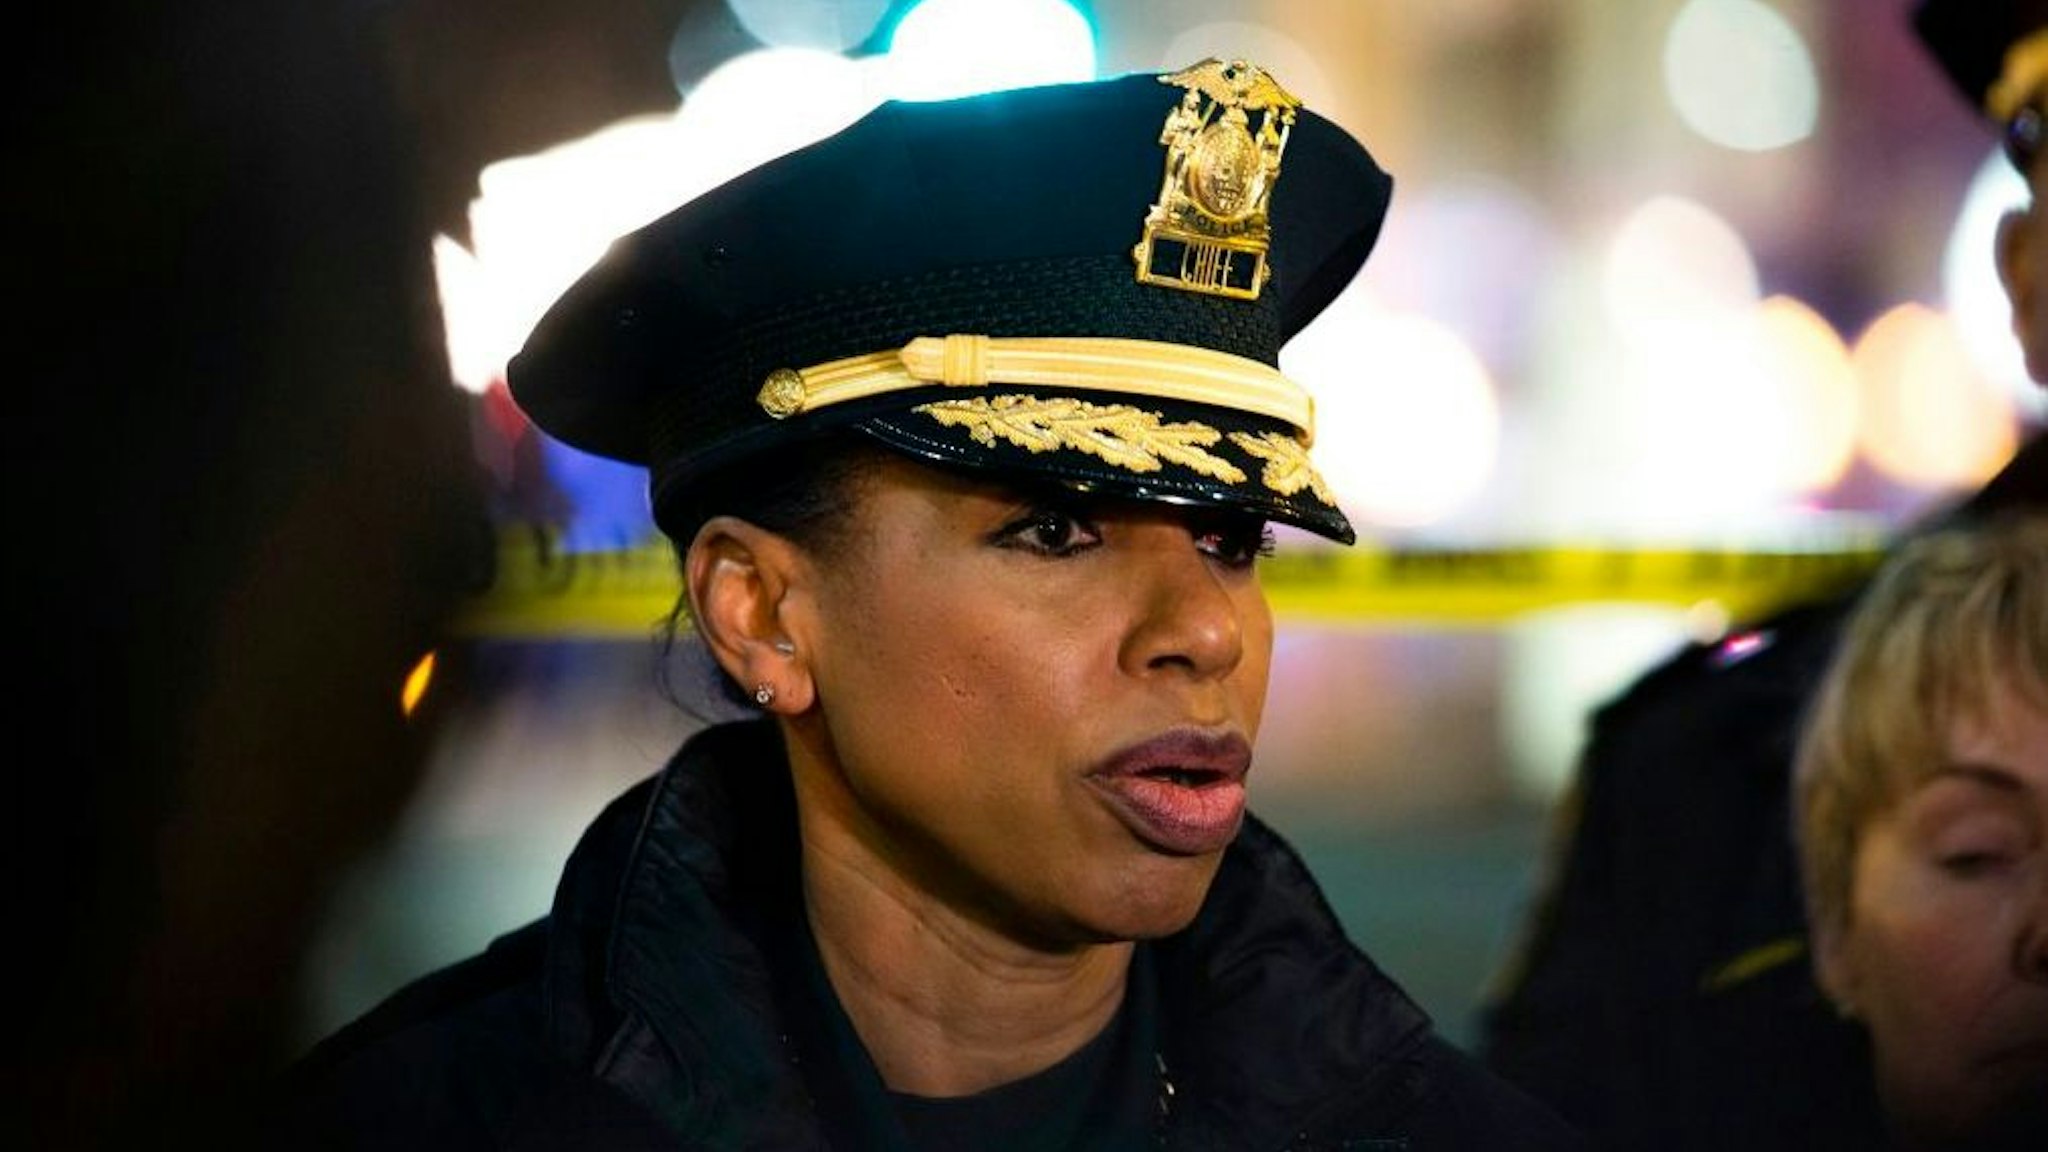 Seattle Police Chief Carmen Best speaks to reporters at the scene of a shooting that left one person dead and seven injured, including a child, in downtown Seattle, Washington on January 22, 2020.